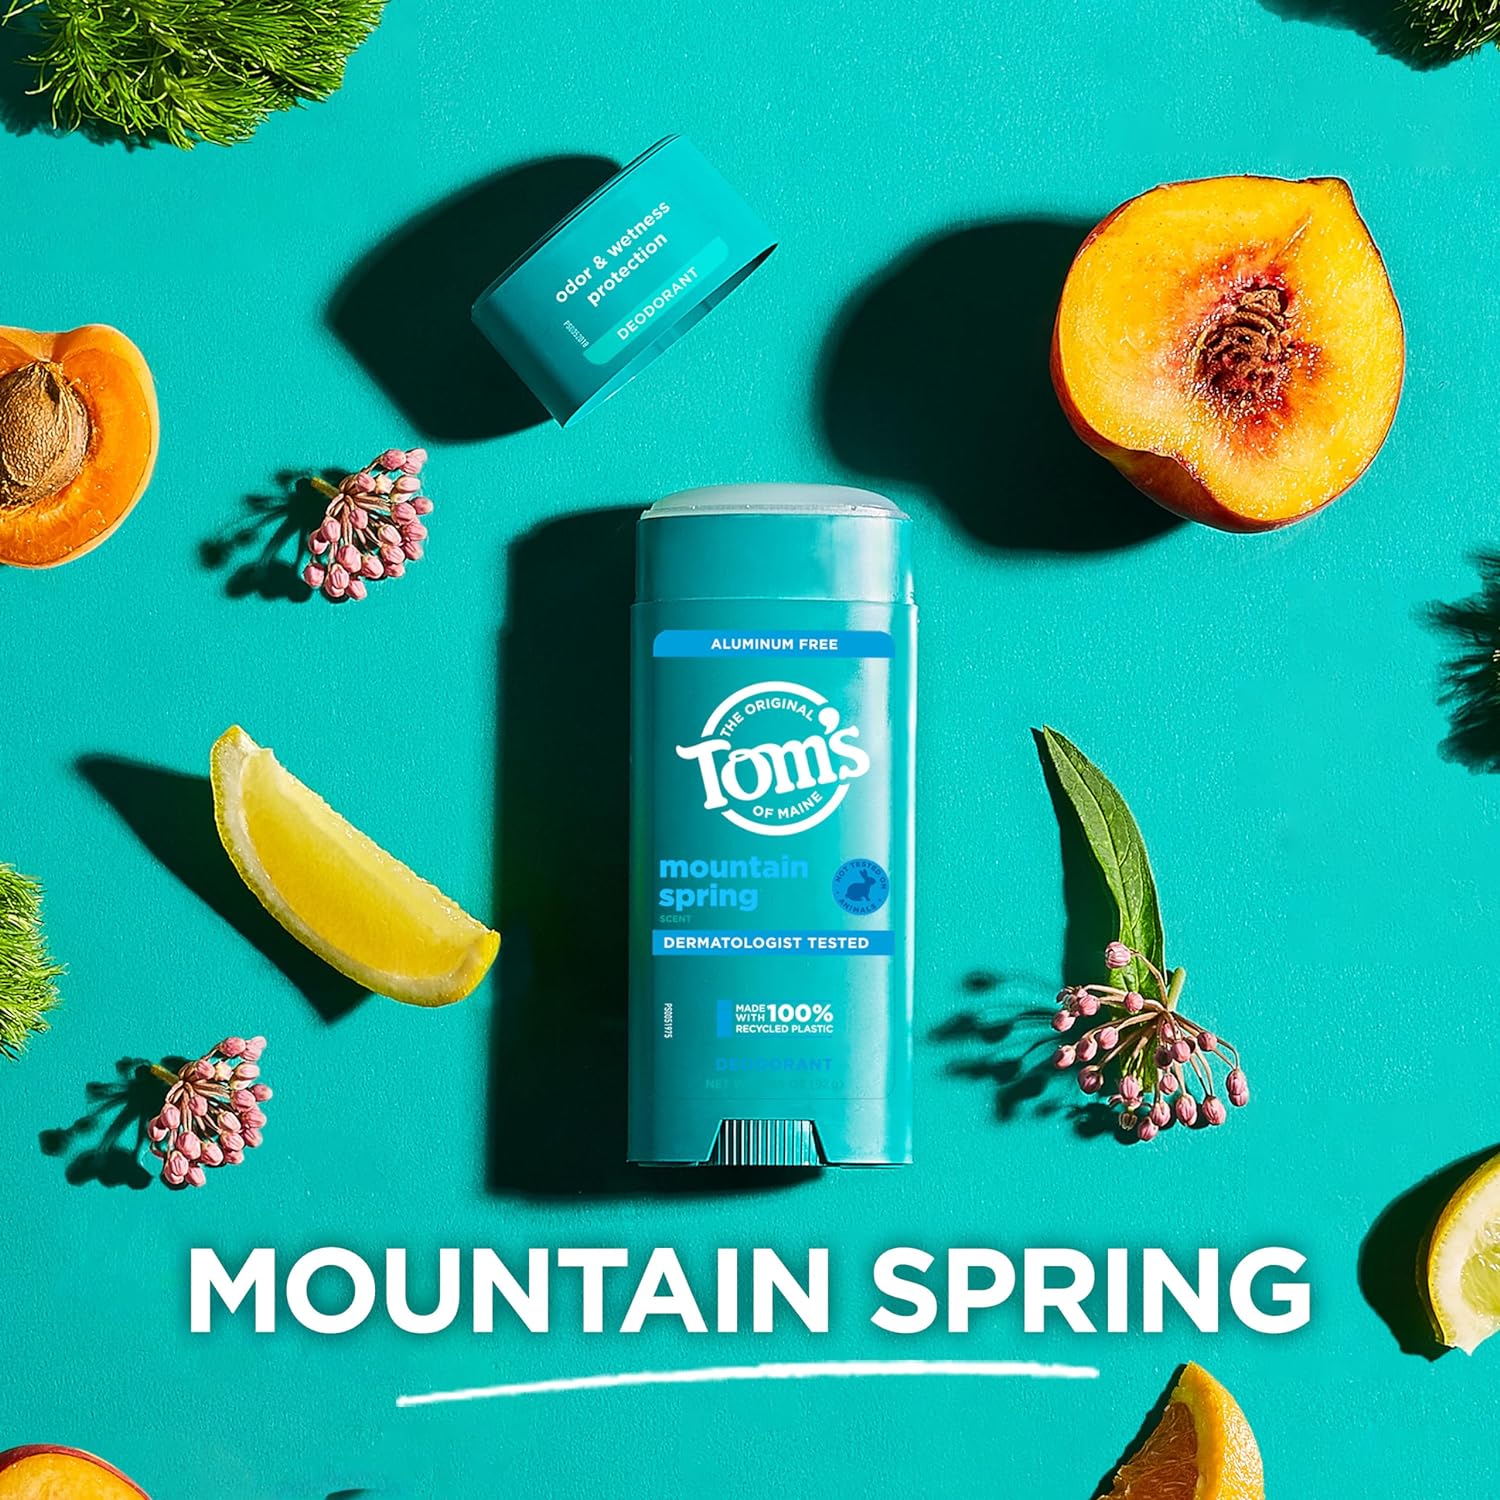 Tom’s of Maine Mountain Spring Natural Deodorant for Men and Women, Aluminum Free, 3.25 oz, 2-Pack : Beauty & Personal Care